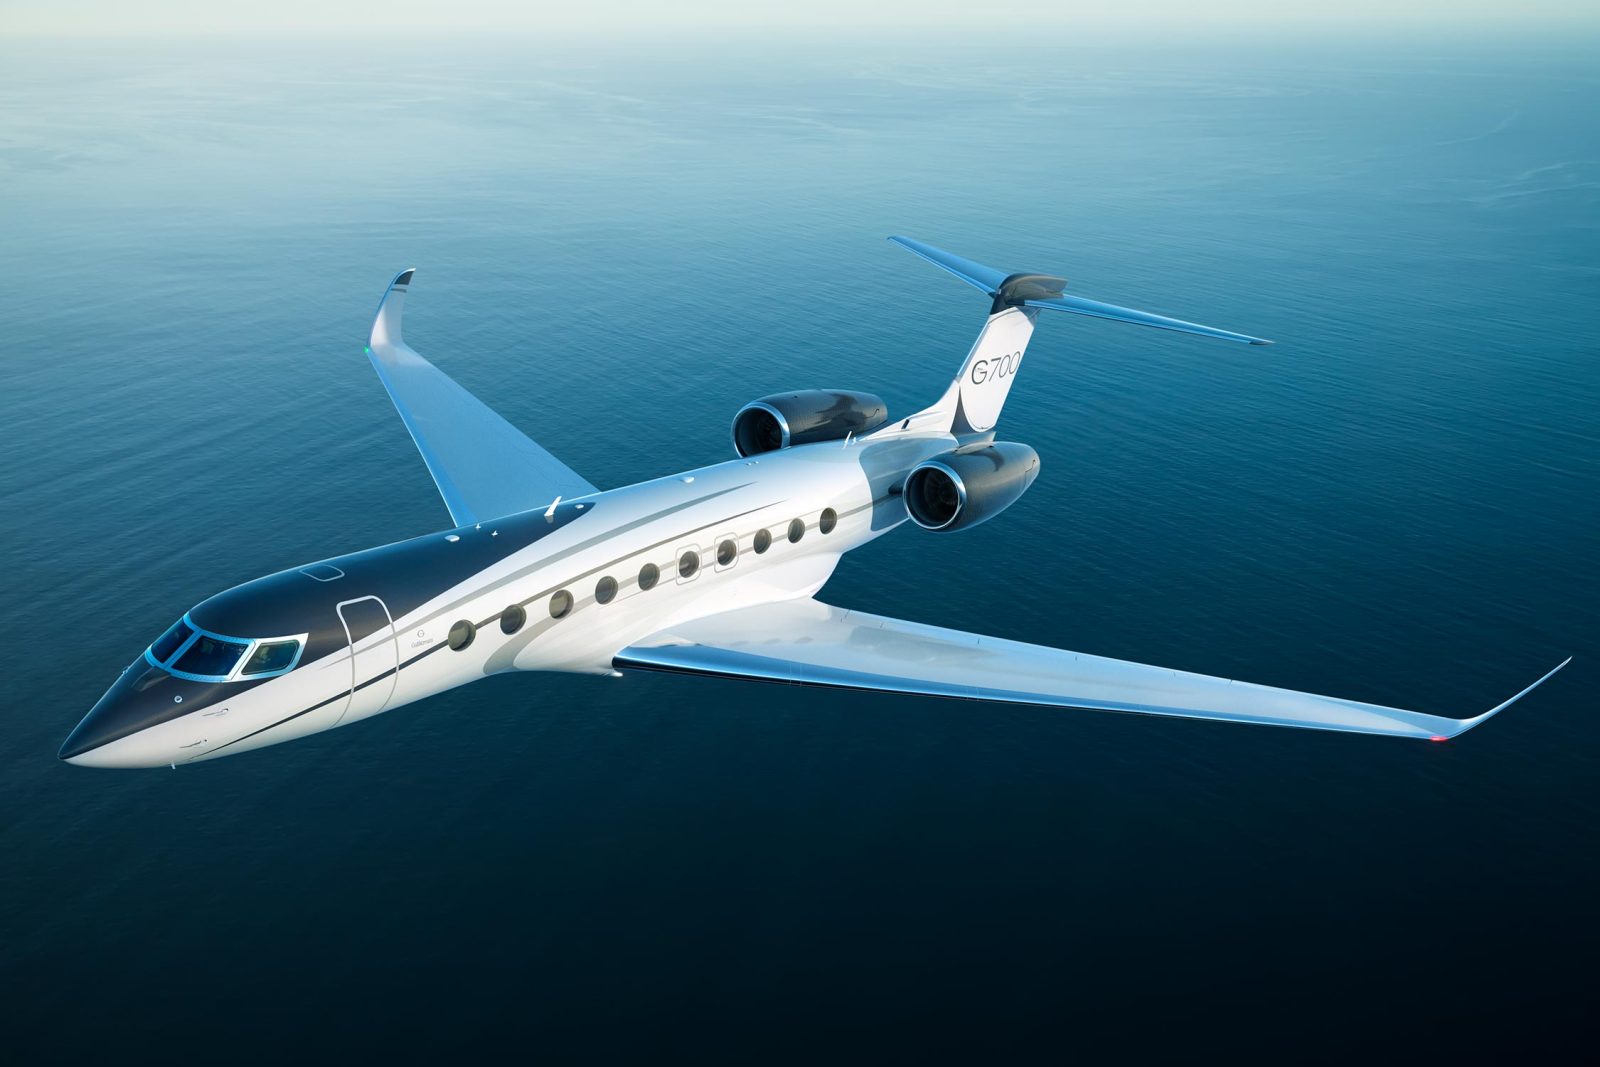 How much is the Gulfstream G700 private jet?